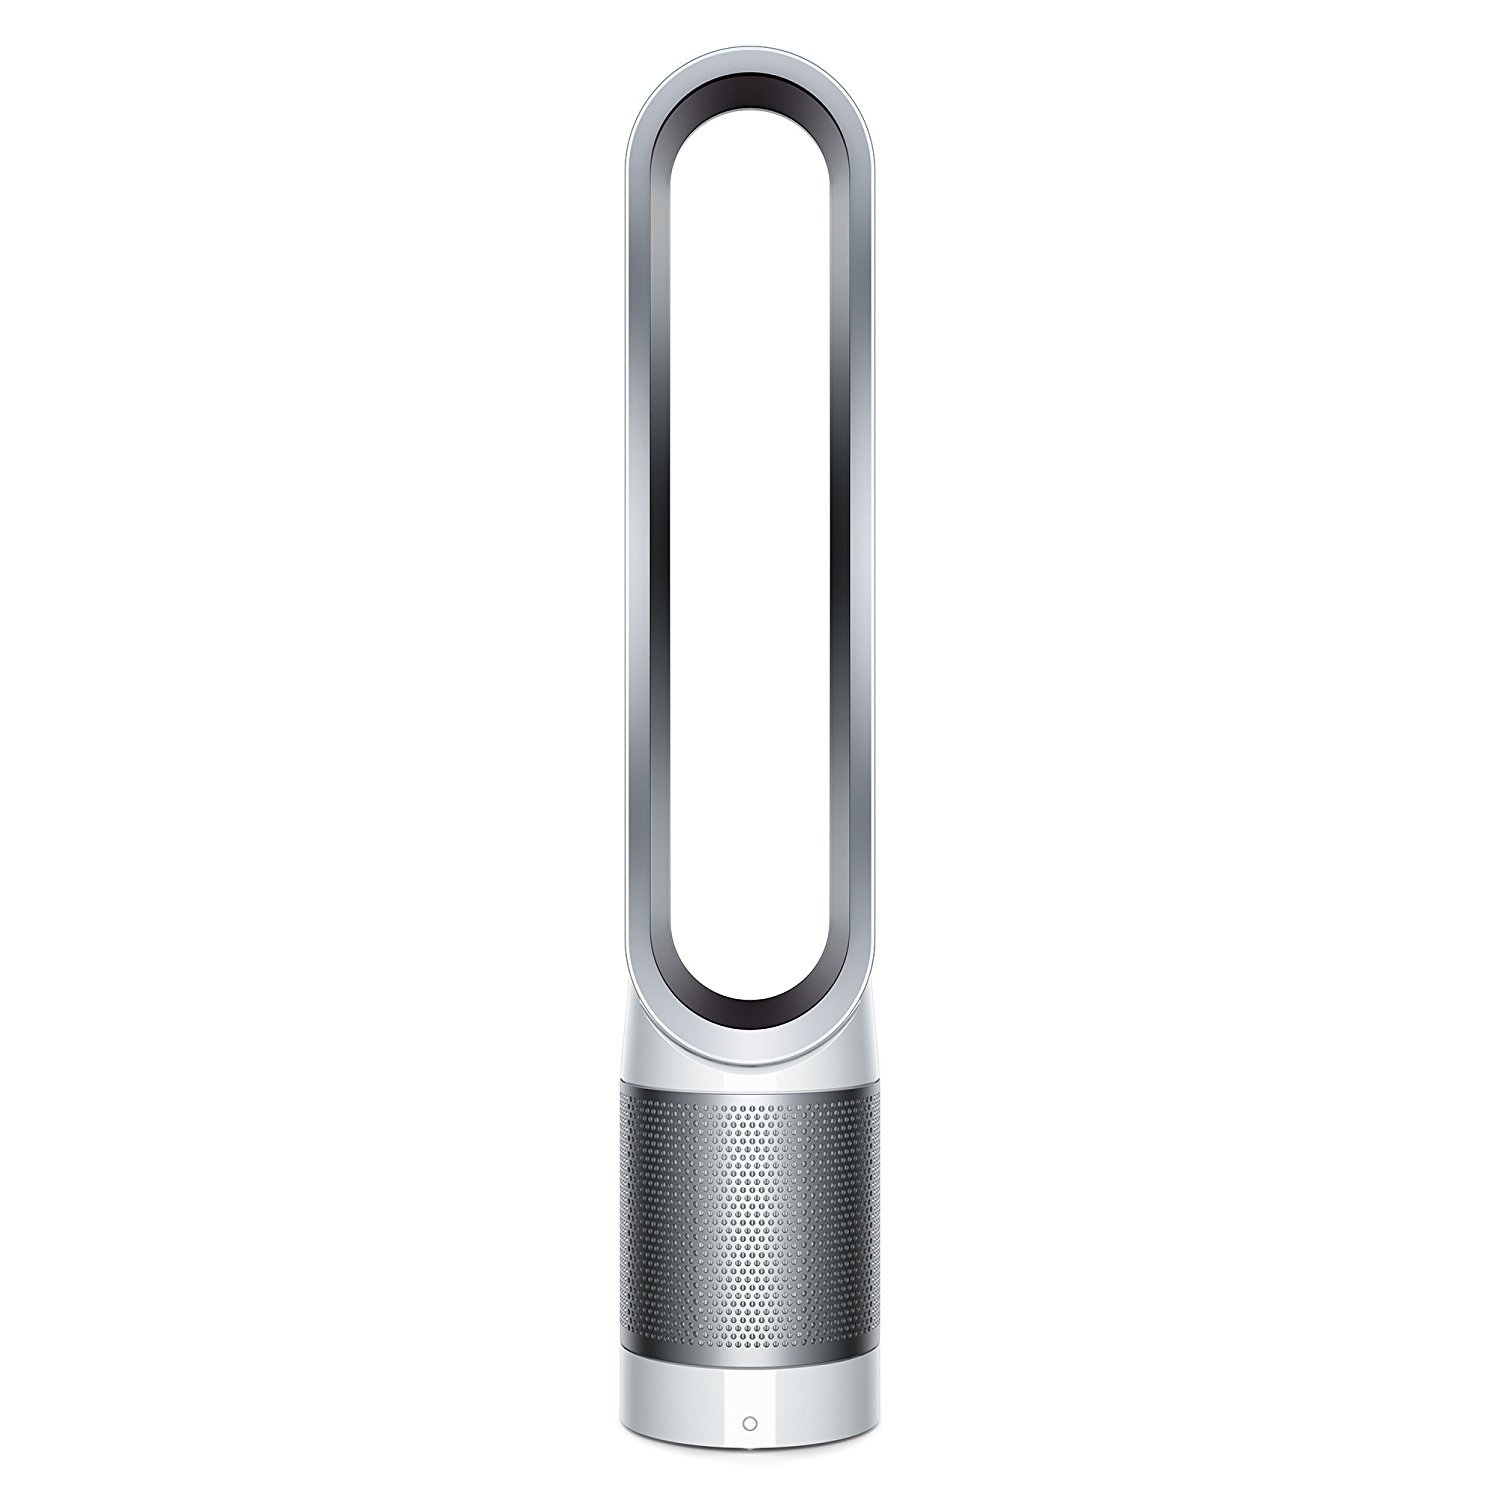 Dyson Pure Cool Link Tower Air Purifier, TP03 for removing ultra fine particles